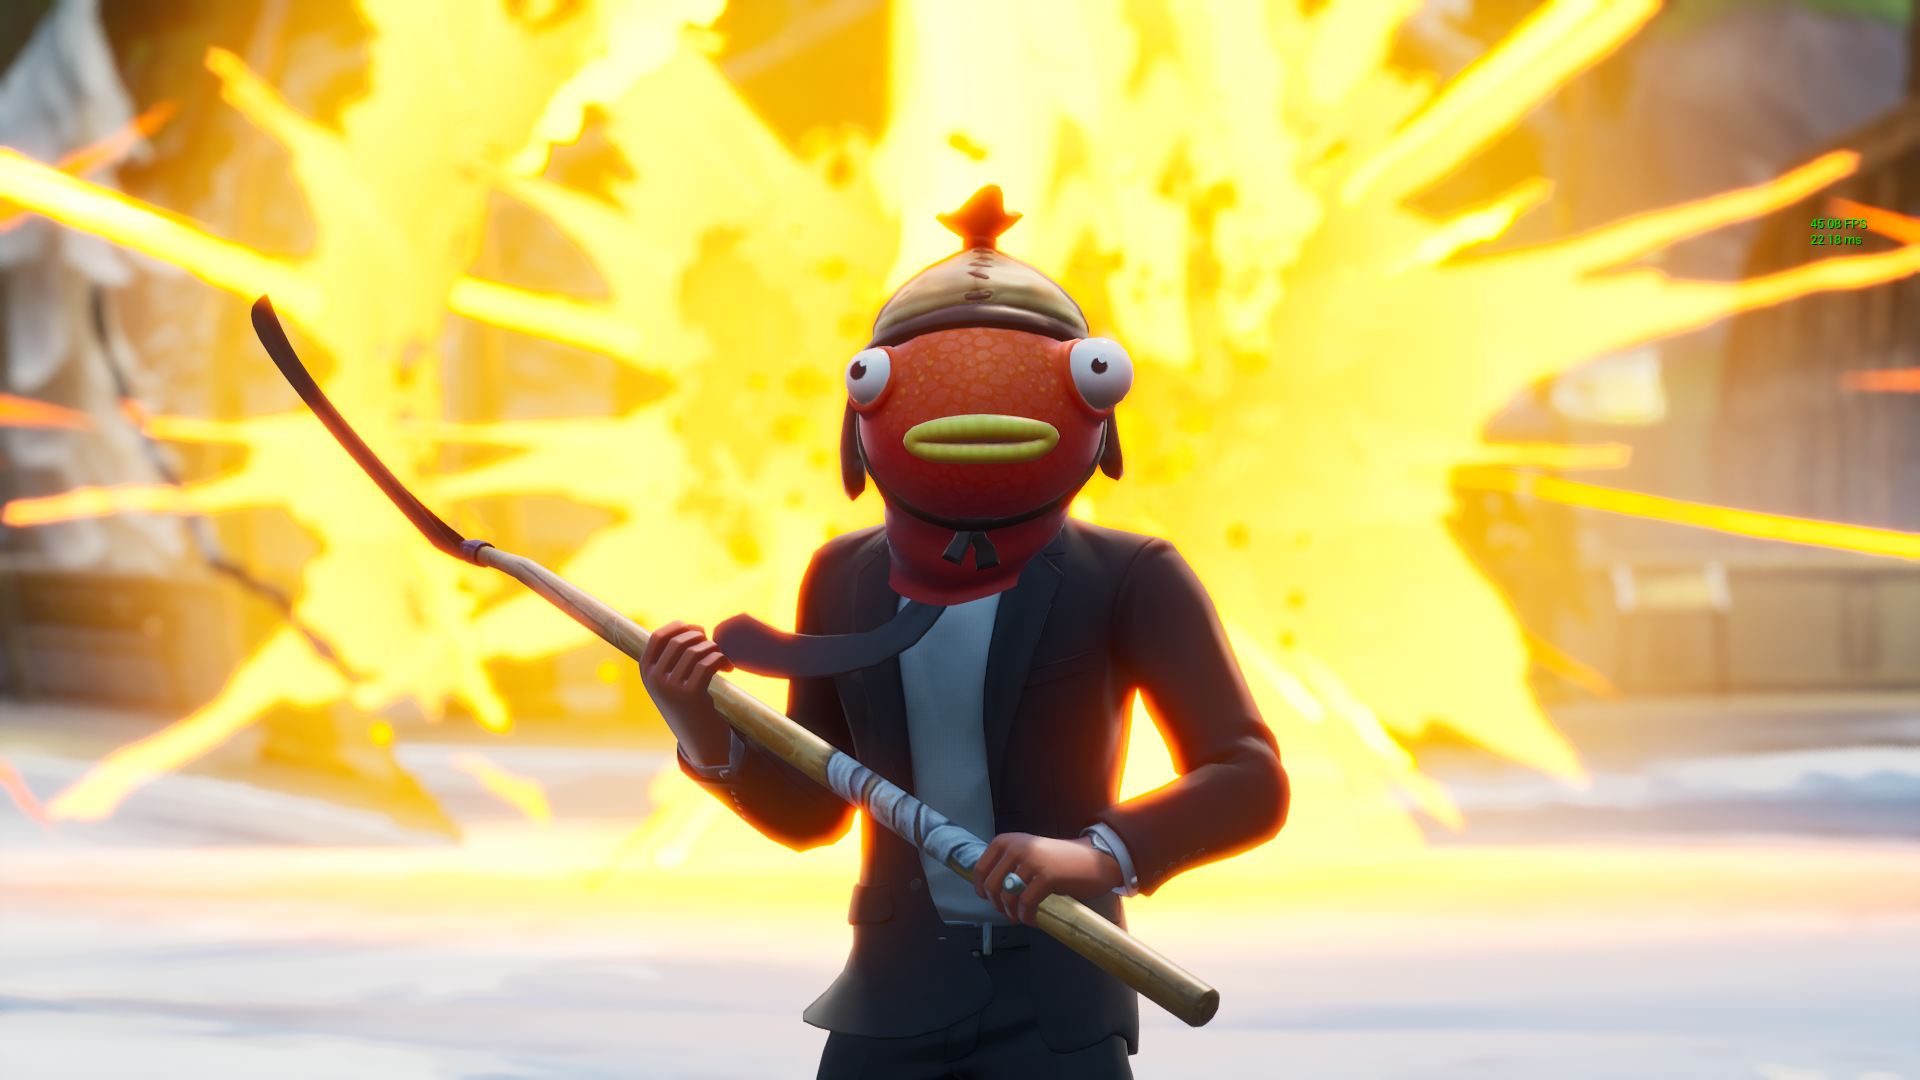 Hopped on the John Wick mode and decided to shoot the most epic